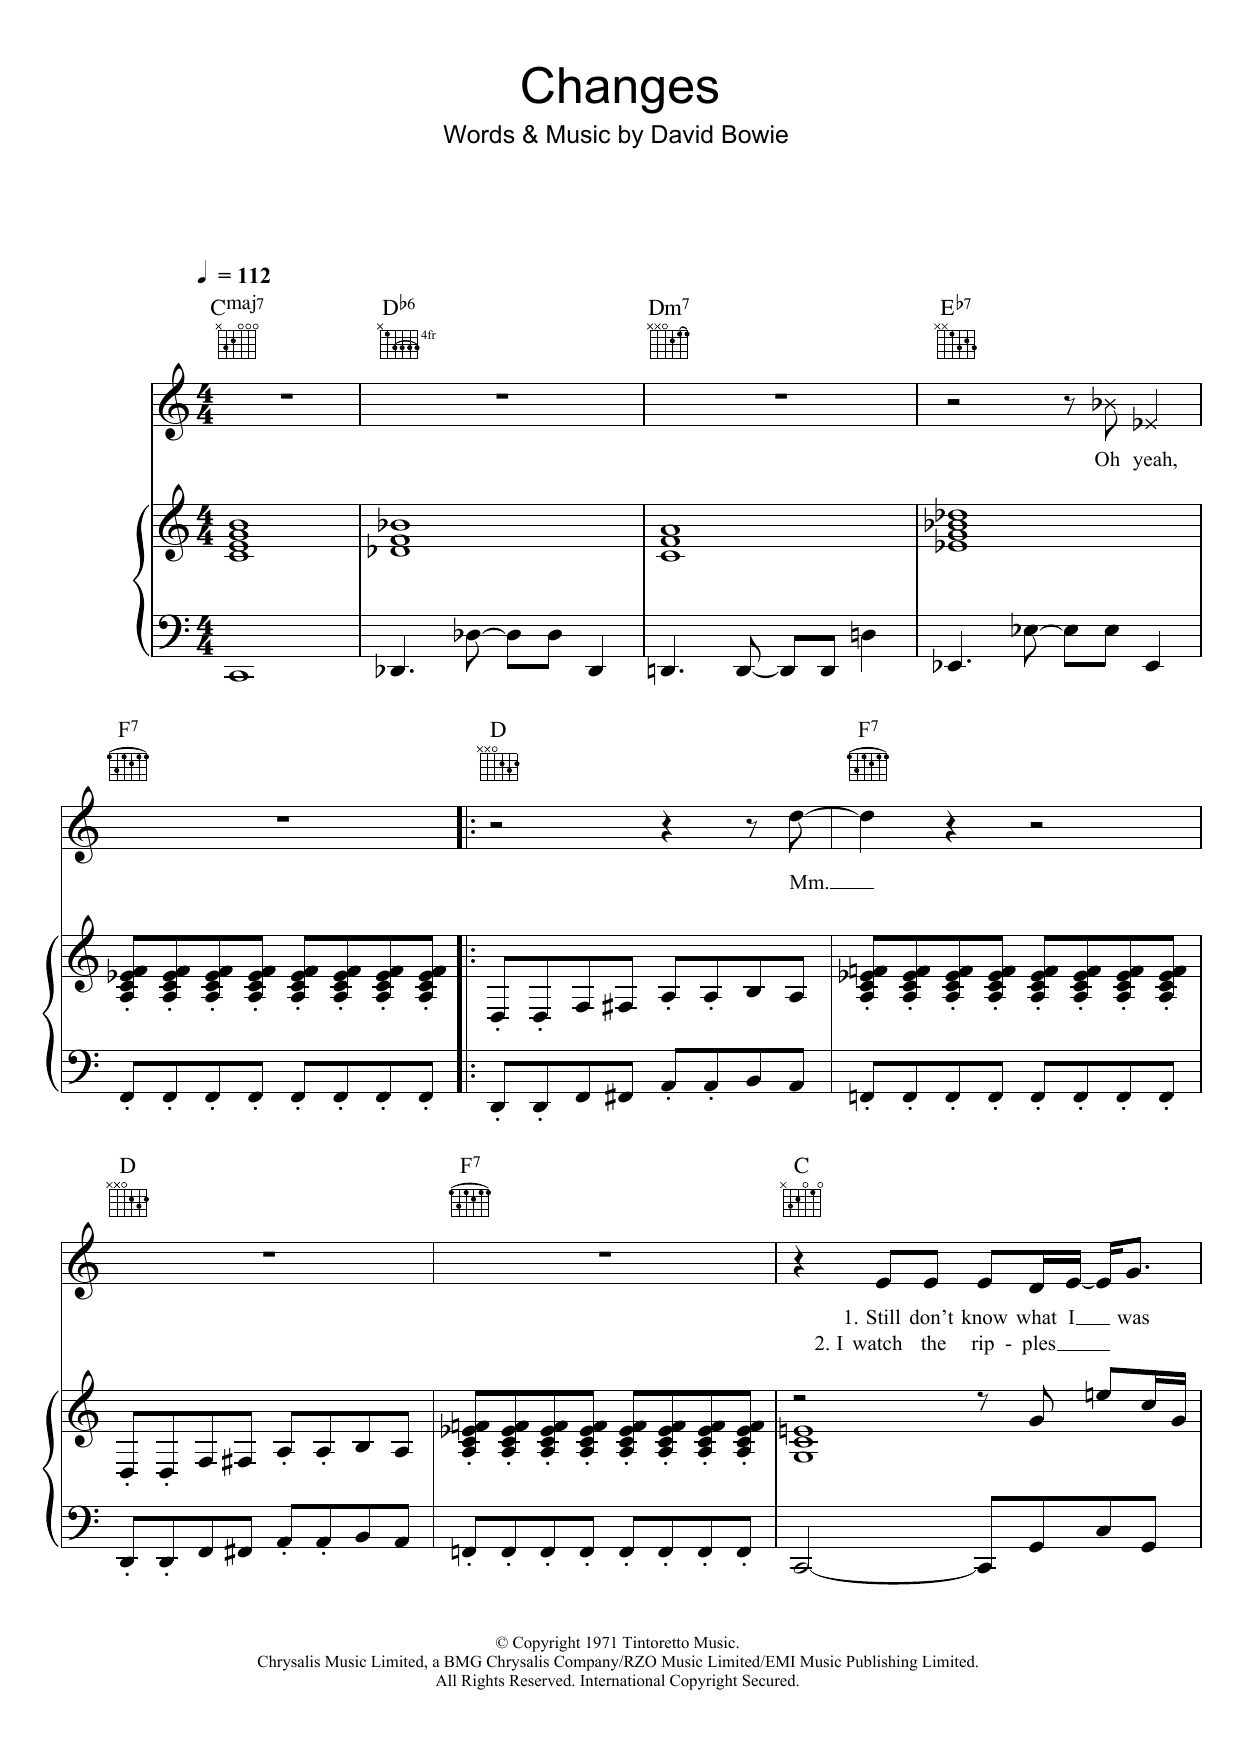 Download David Bowie Changes Sheet Music